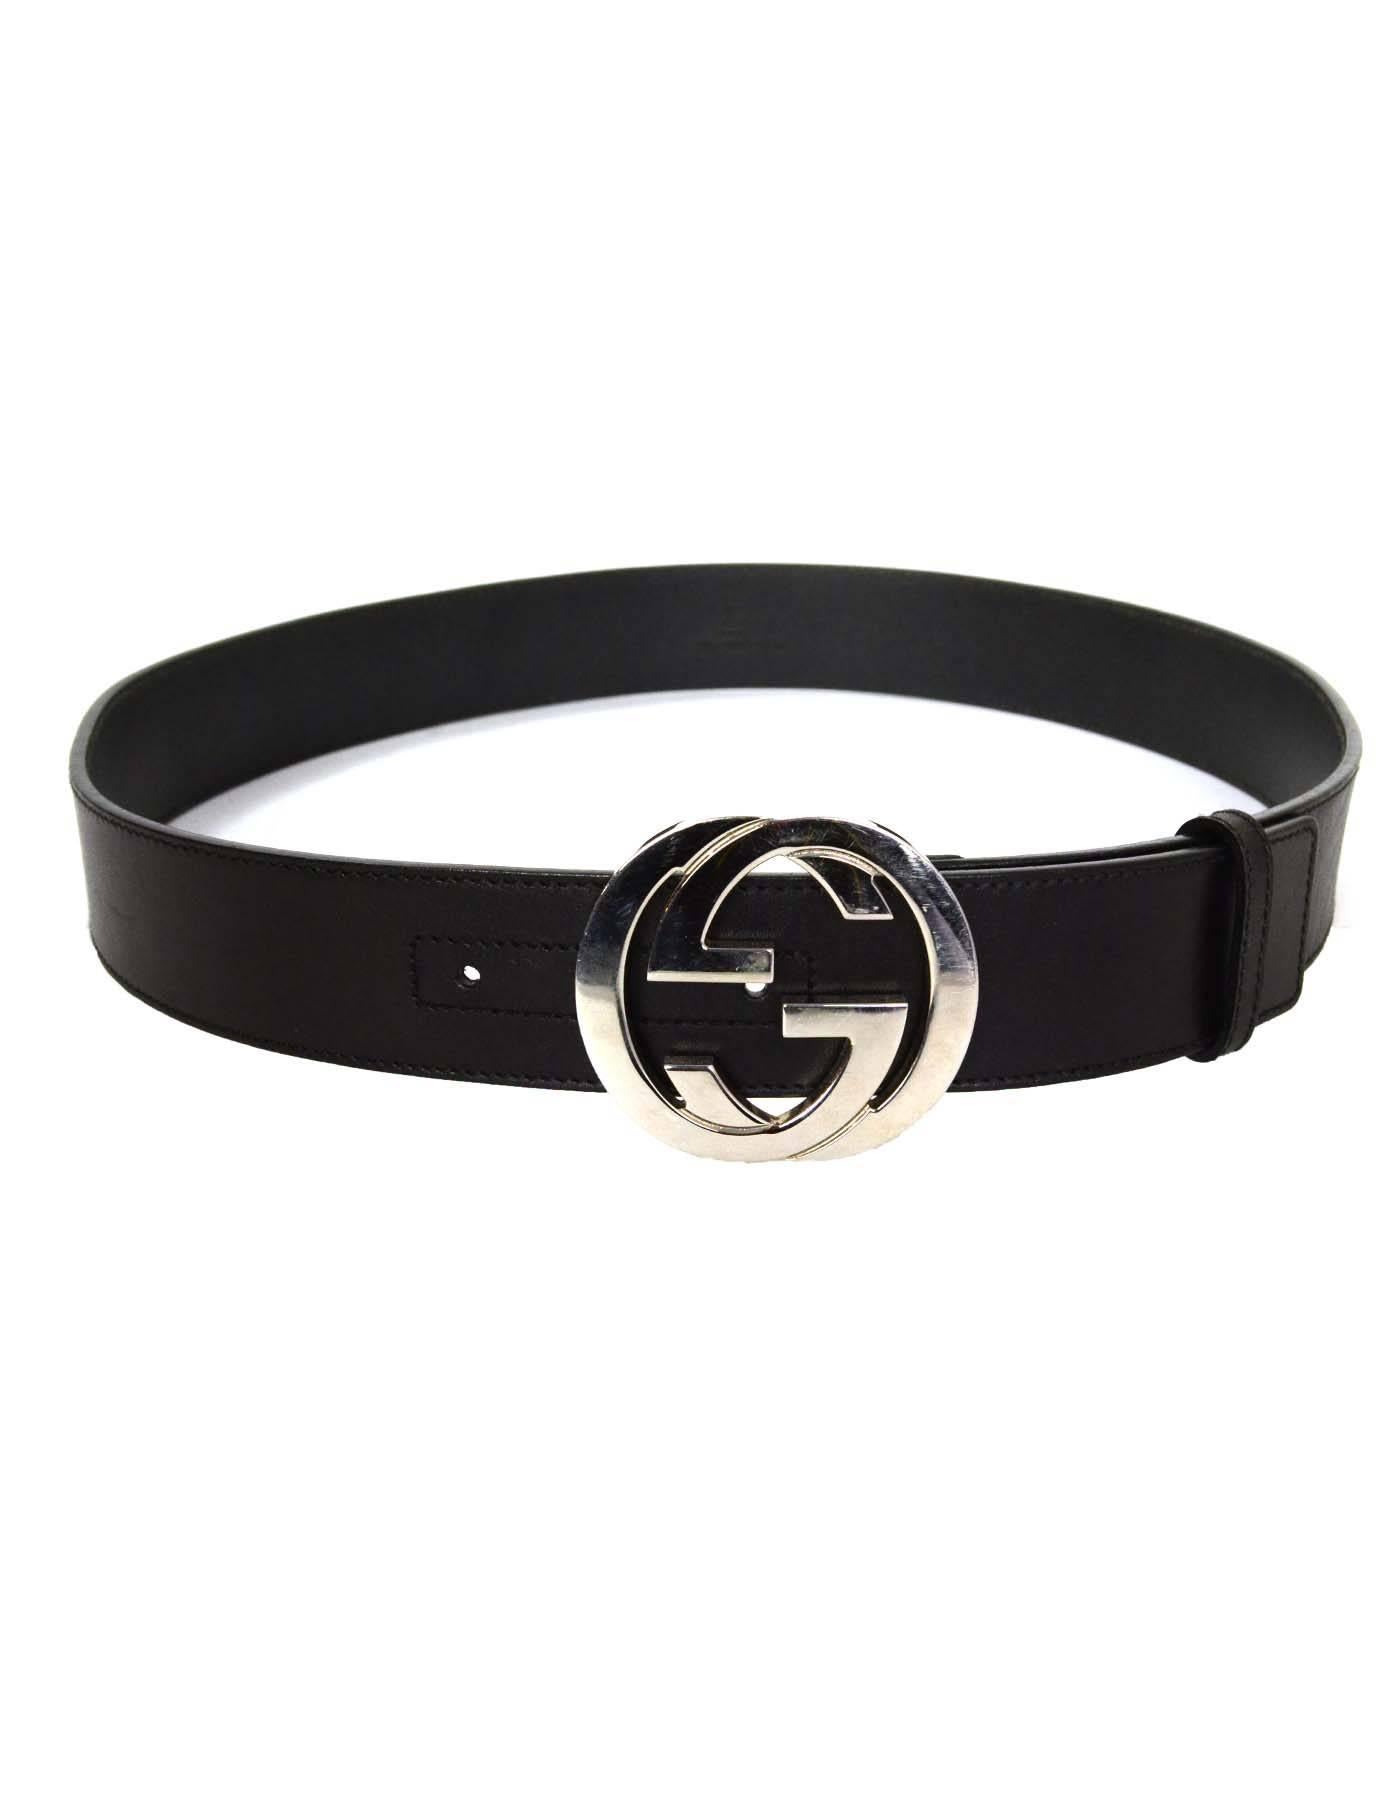 Gucci Black Leather Belt 
Features the Gucci double G logo buckle
Made In: Italy
Color: Black 
Hardware: Silvertone
Materials: Leather and metal
Closure/Opening: Stud and notch closure
Stamp: 114984-1766-90-36
Overall Condition: Excellent